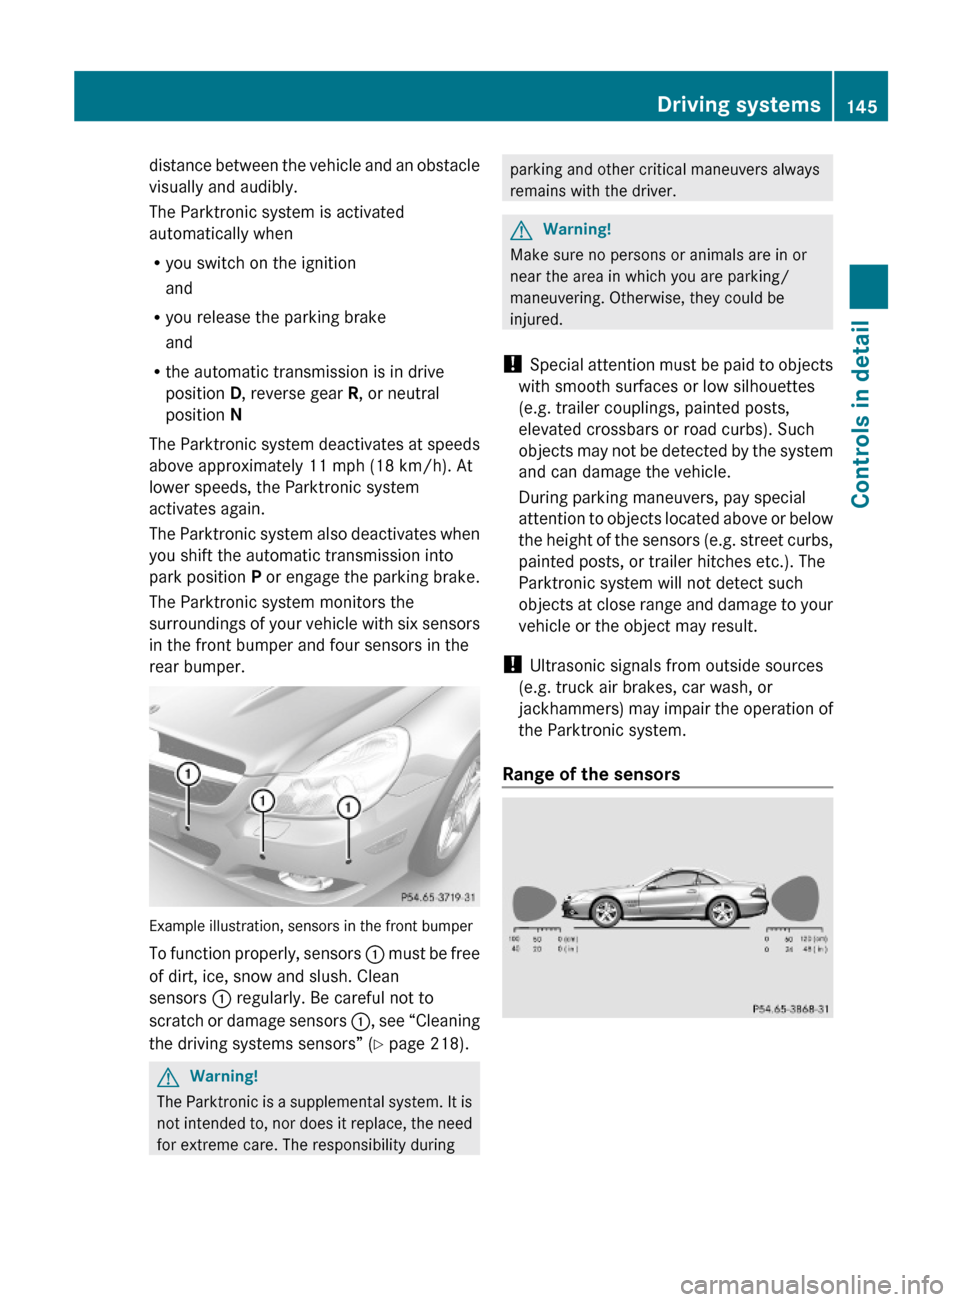 MERCEDES-BENZ SL600 2012 R230 Owners Manual distance between the vehicle and an obstacle
visually and audibly.
The Parktronic system is activated
automatically when
Ryou switch on the ignition
and
Ryou release the parking brake
and
Rthe automat